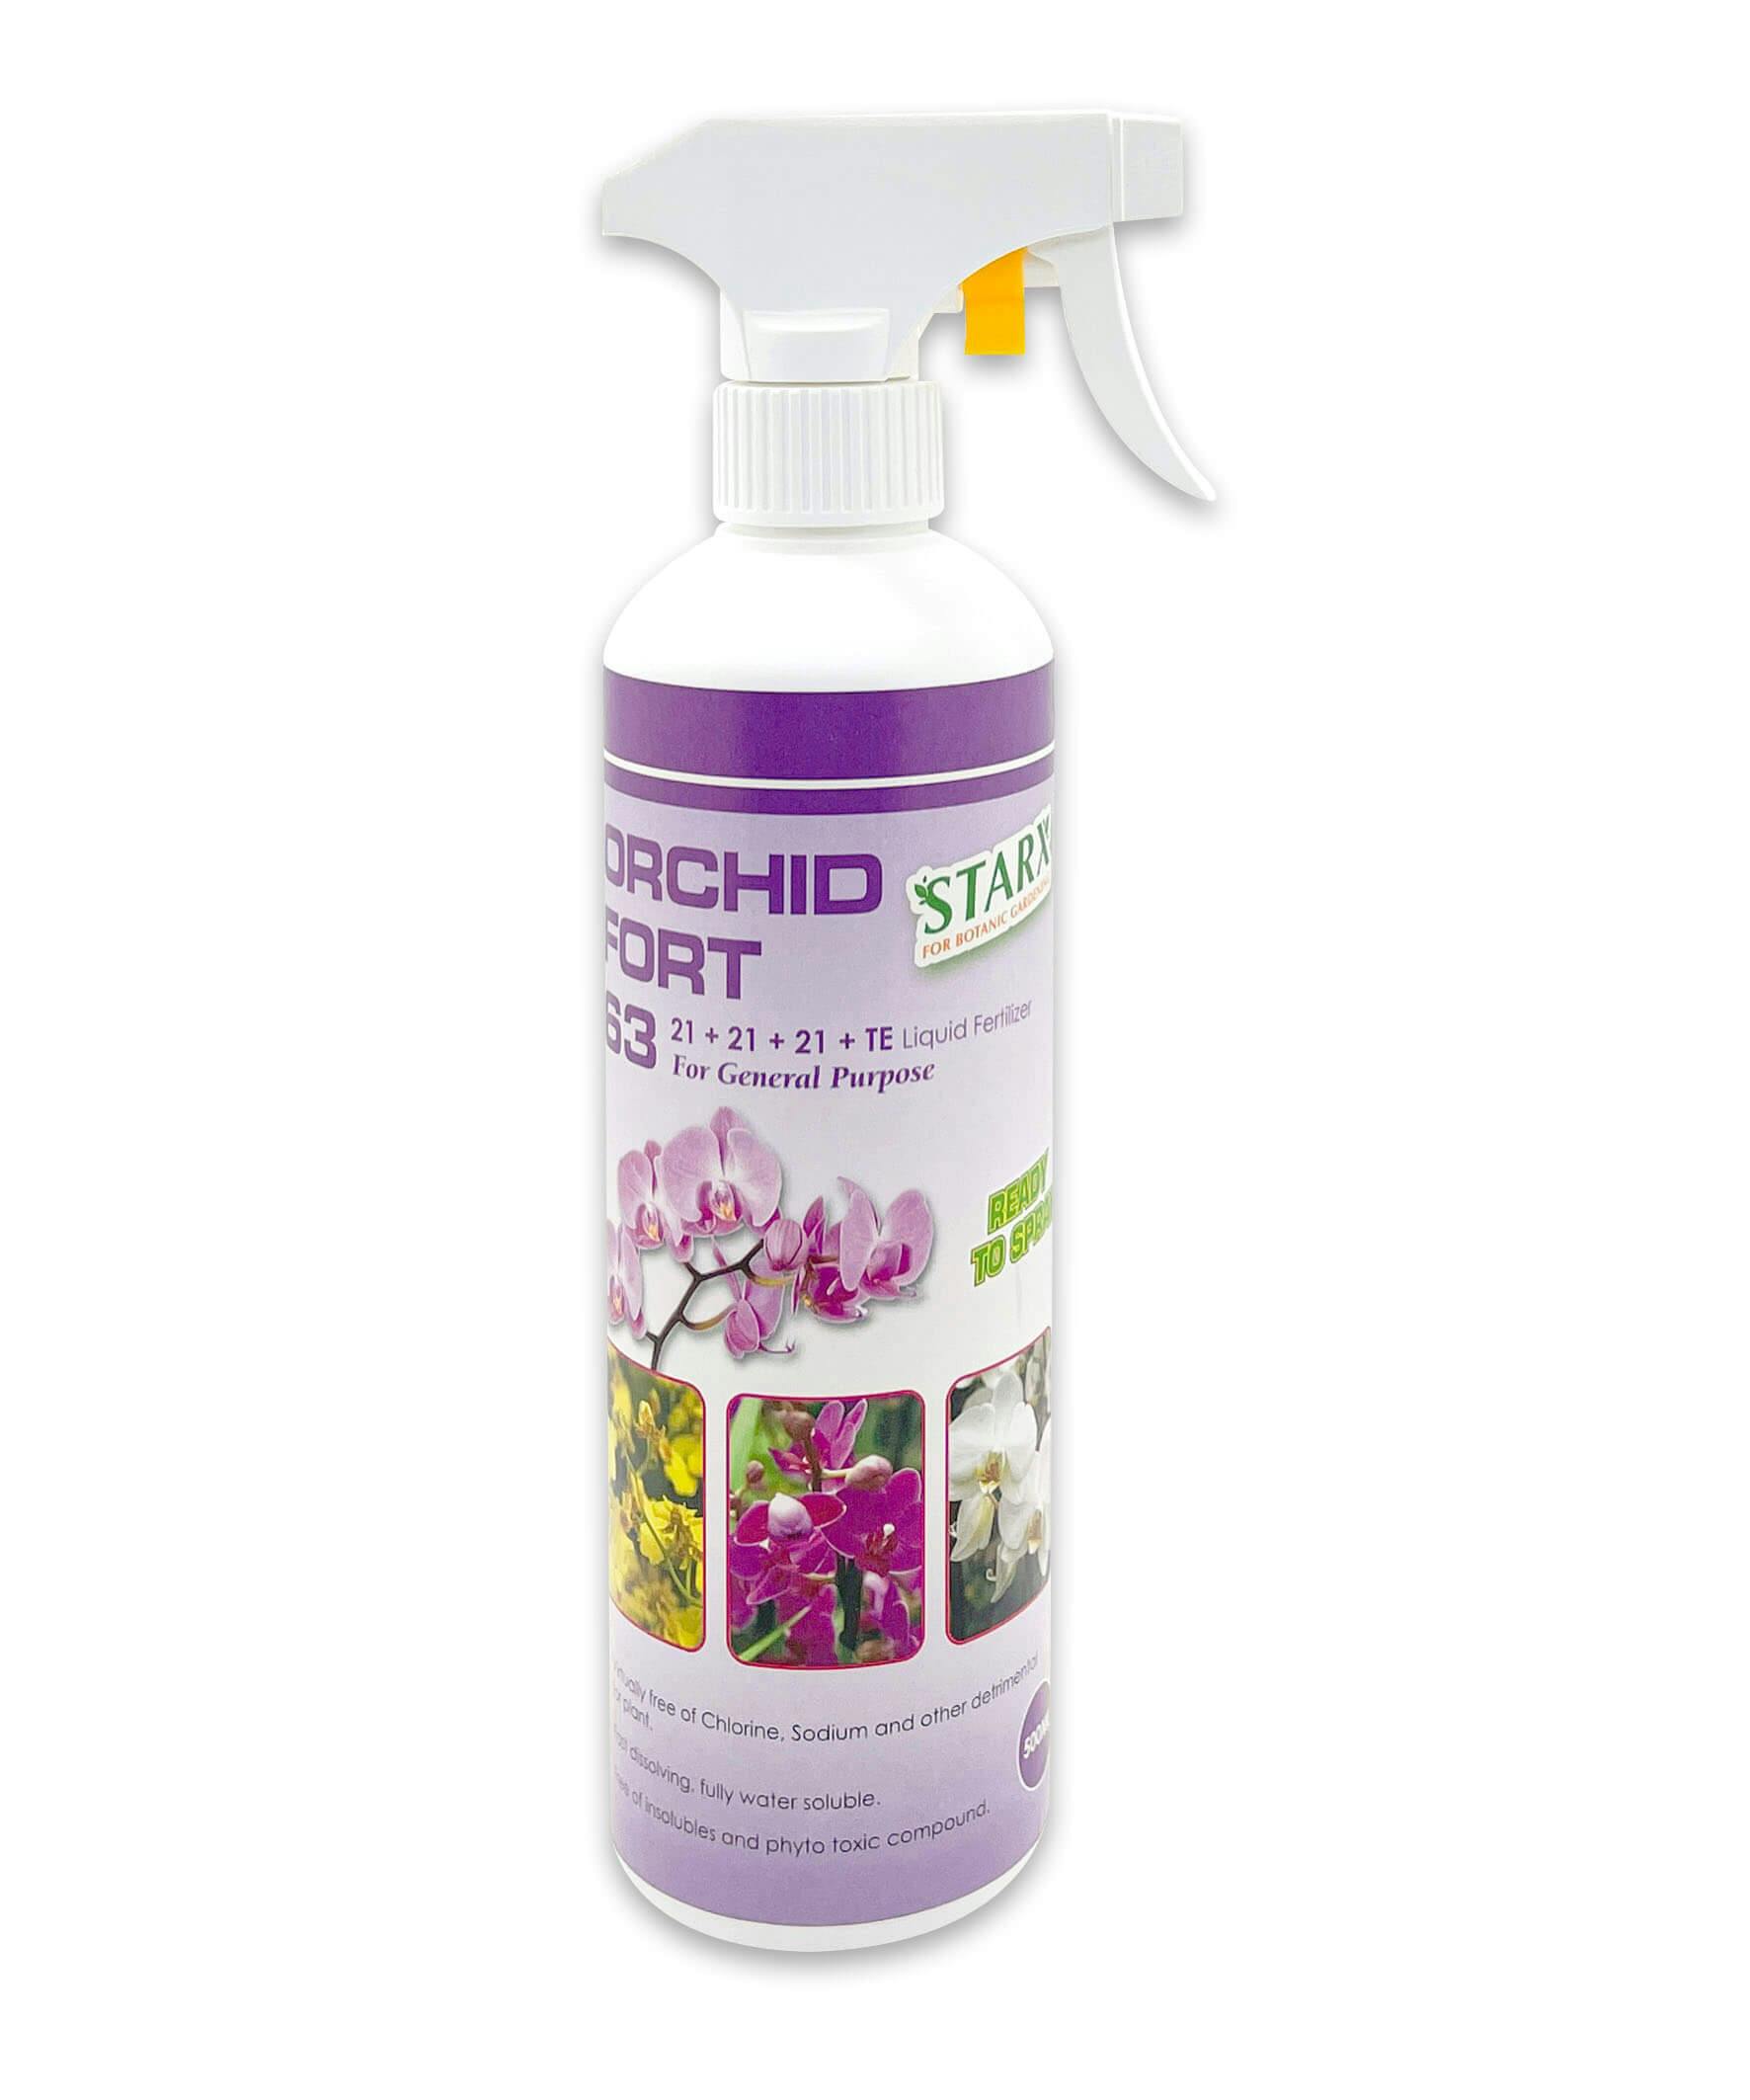 ORCHID FORT 63 (21+21+21) RTS (500ml)